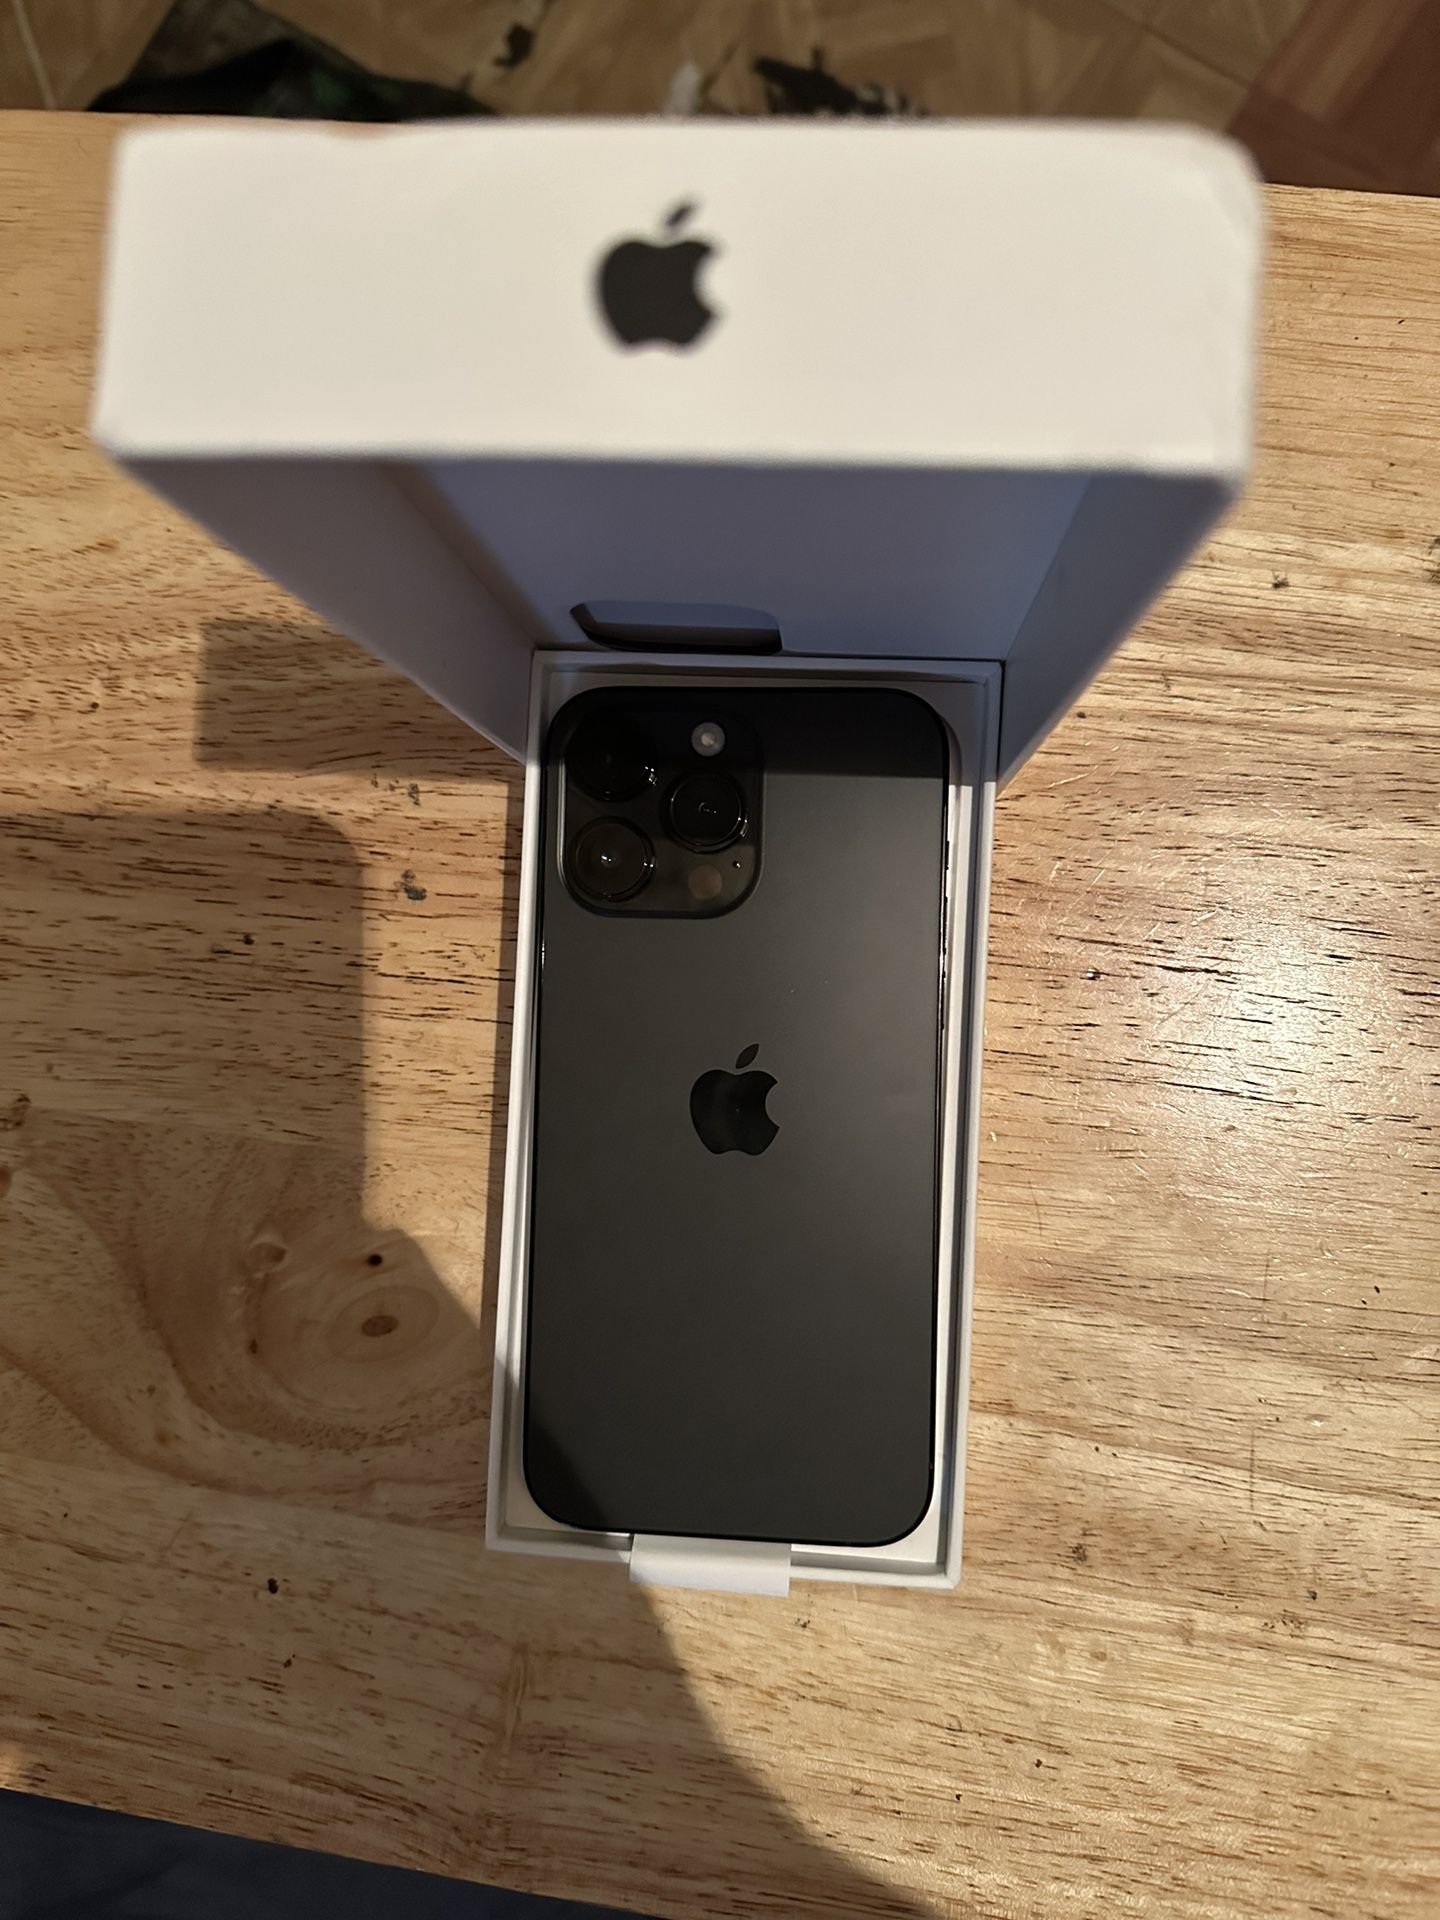 iphone 14 Pro Max 512gb NO SIM RESTRICTIONS Clean Imei Brand New Open Box NEVER ACTIVATED $1,200 Cash 